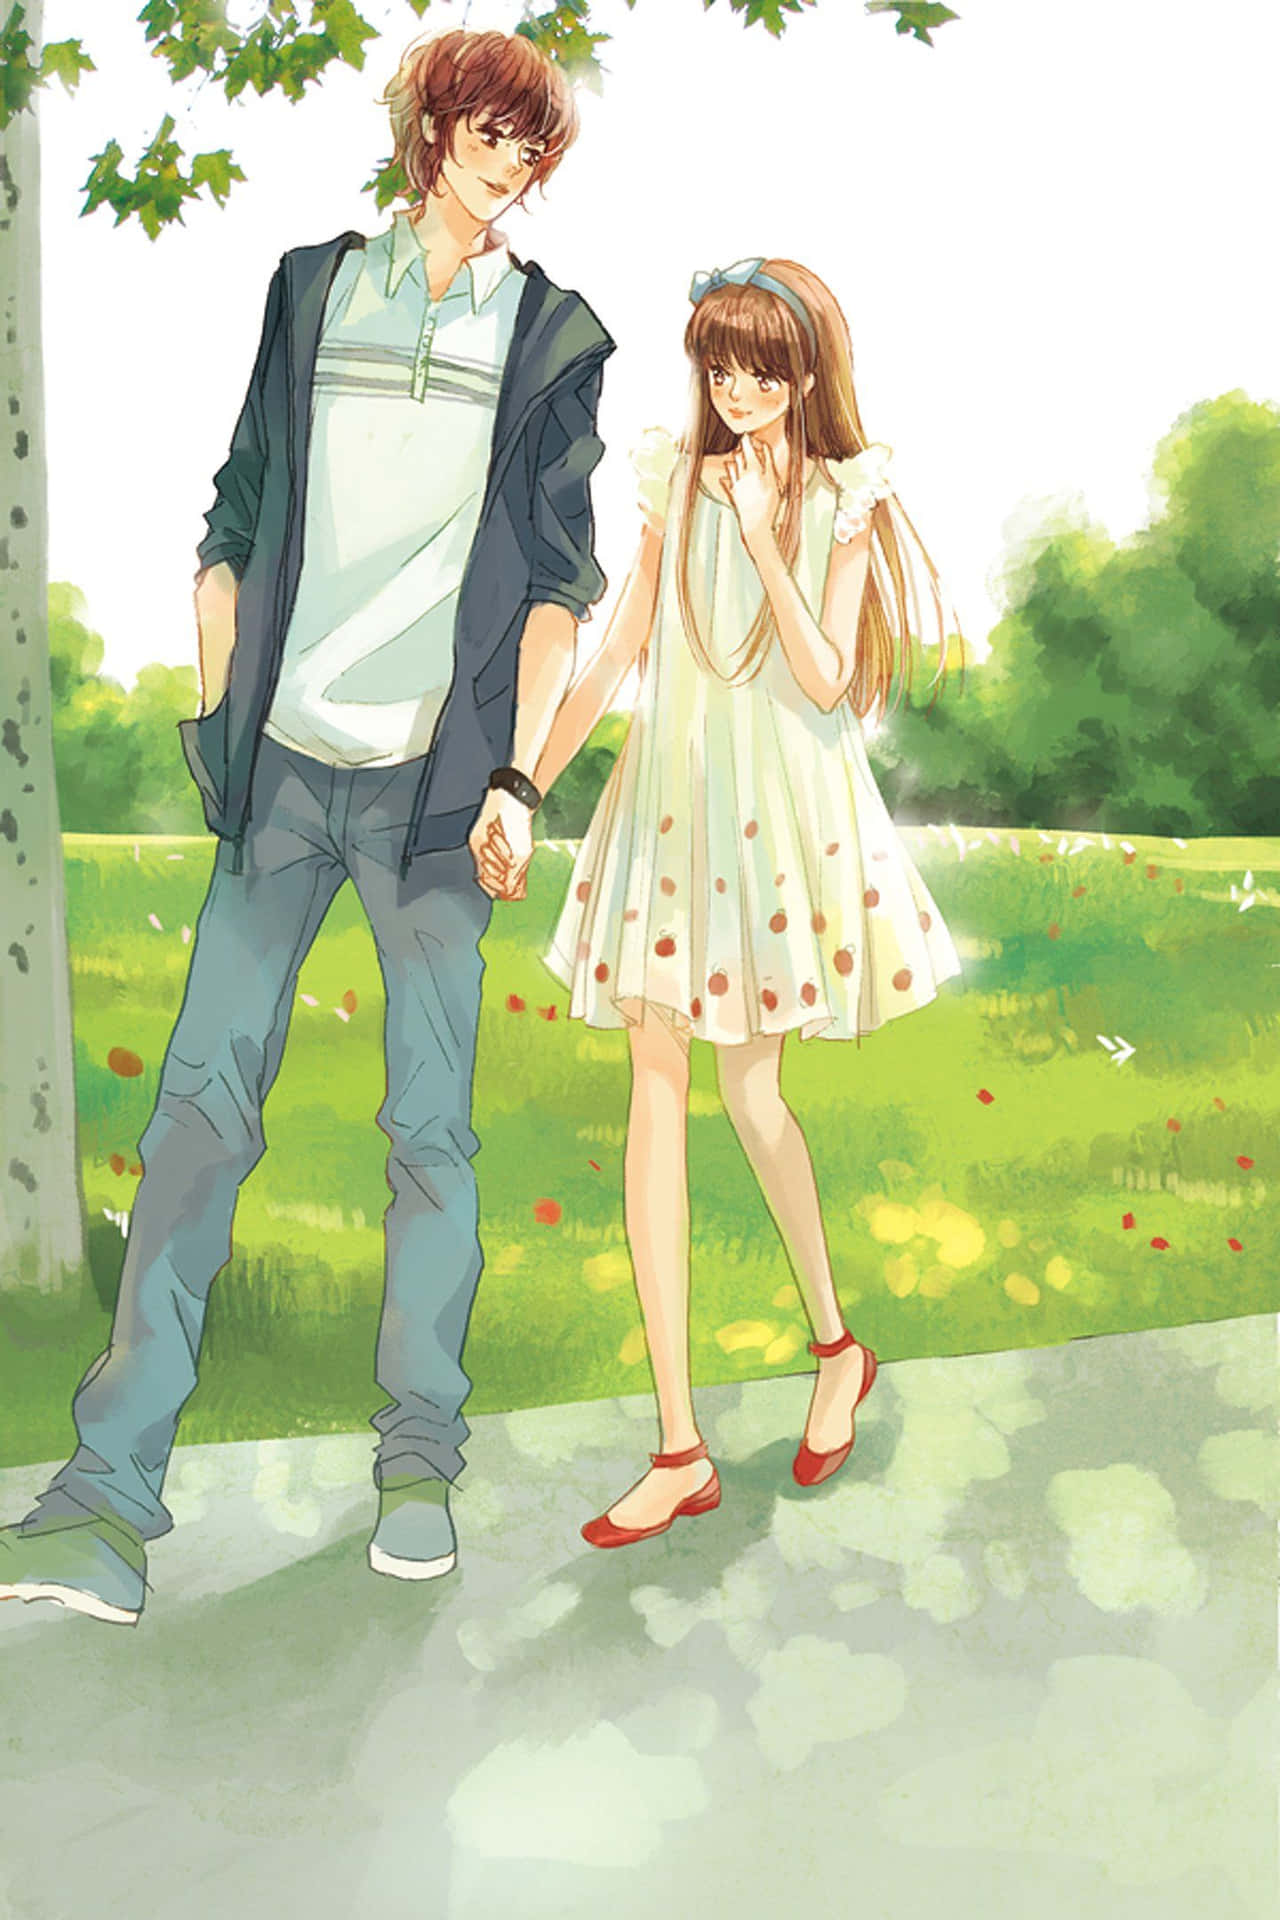 Picture Of A Couple From A Shoujo Manga Holding Hands